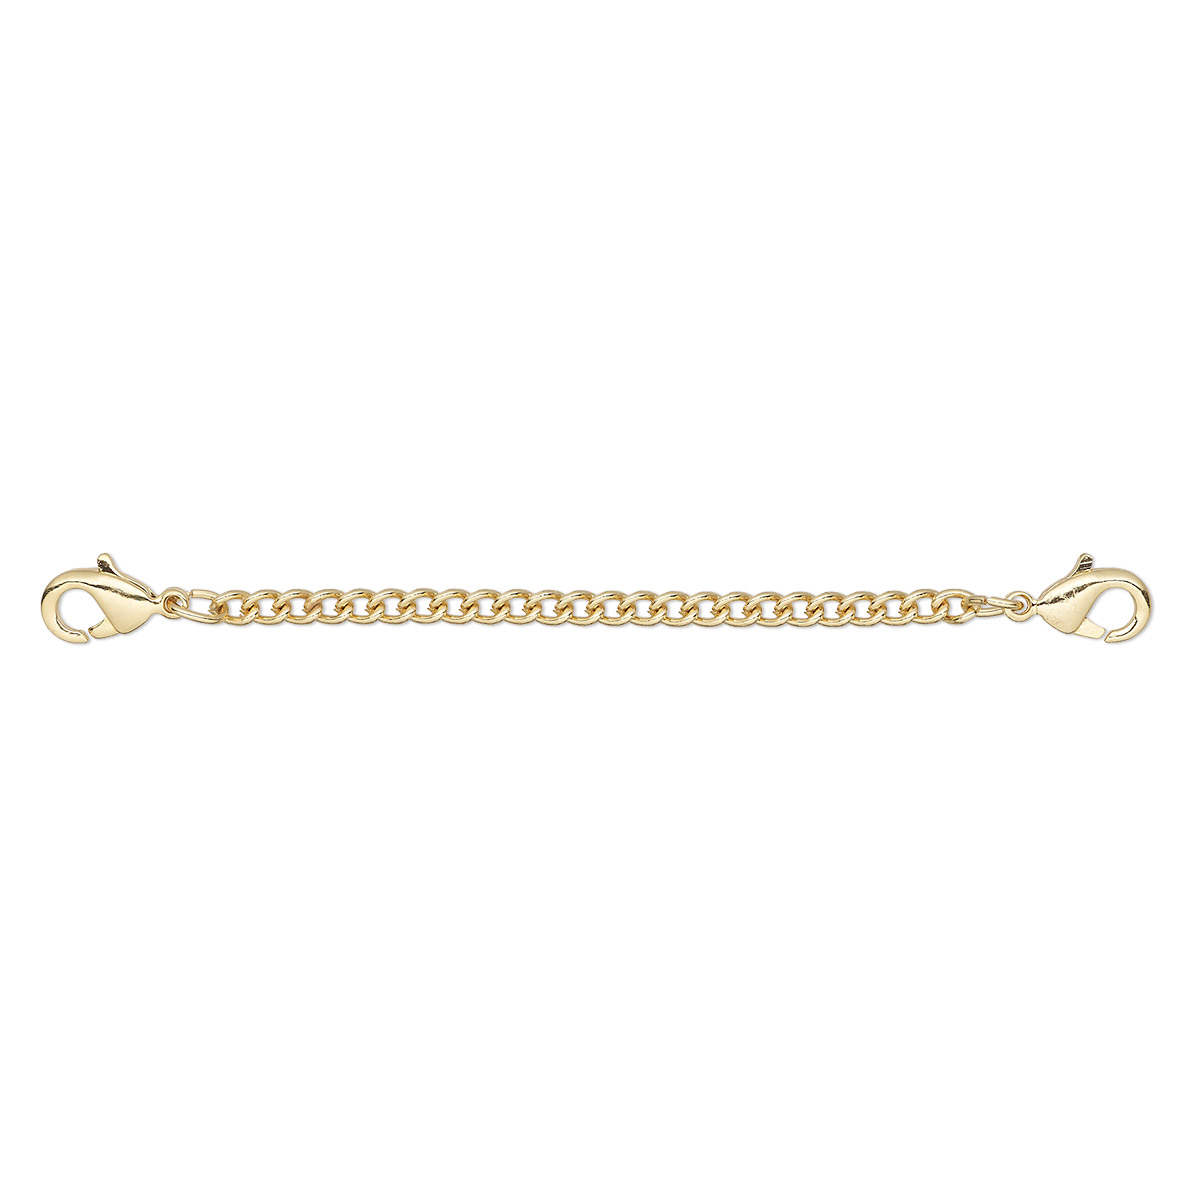 Extender chain, gold-finished brass and steel, 2.4mm curb, 2 inches ...